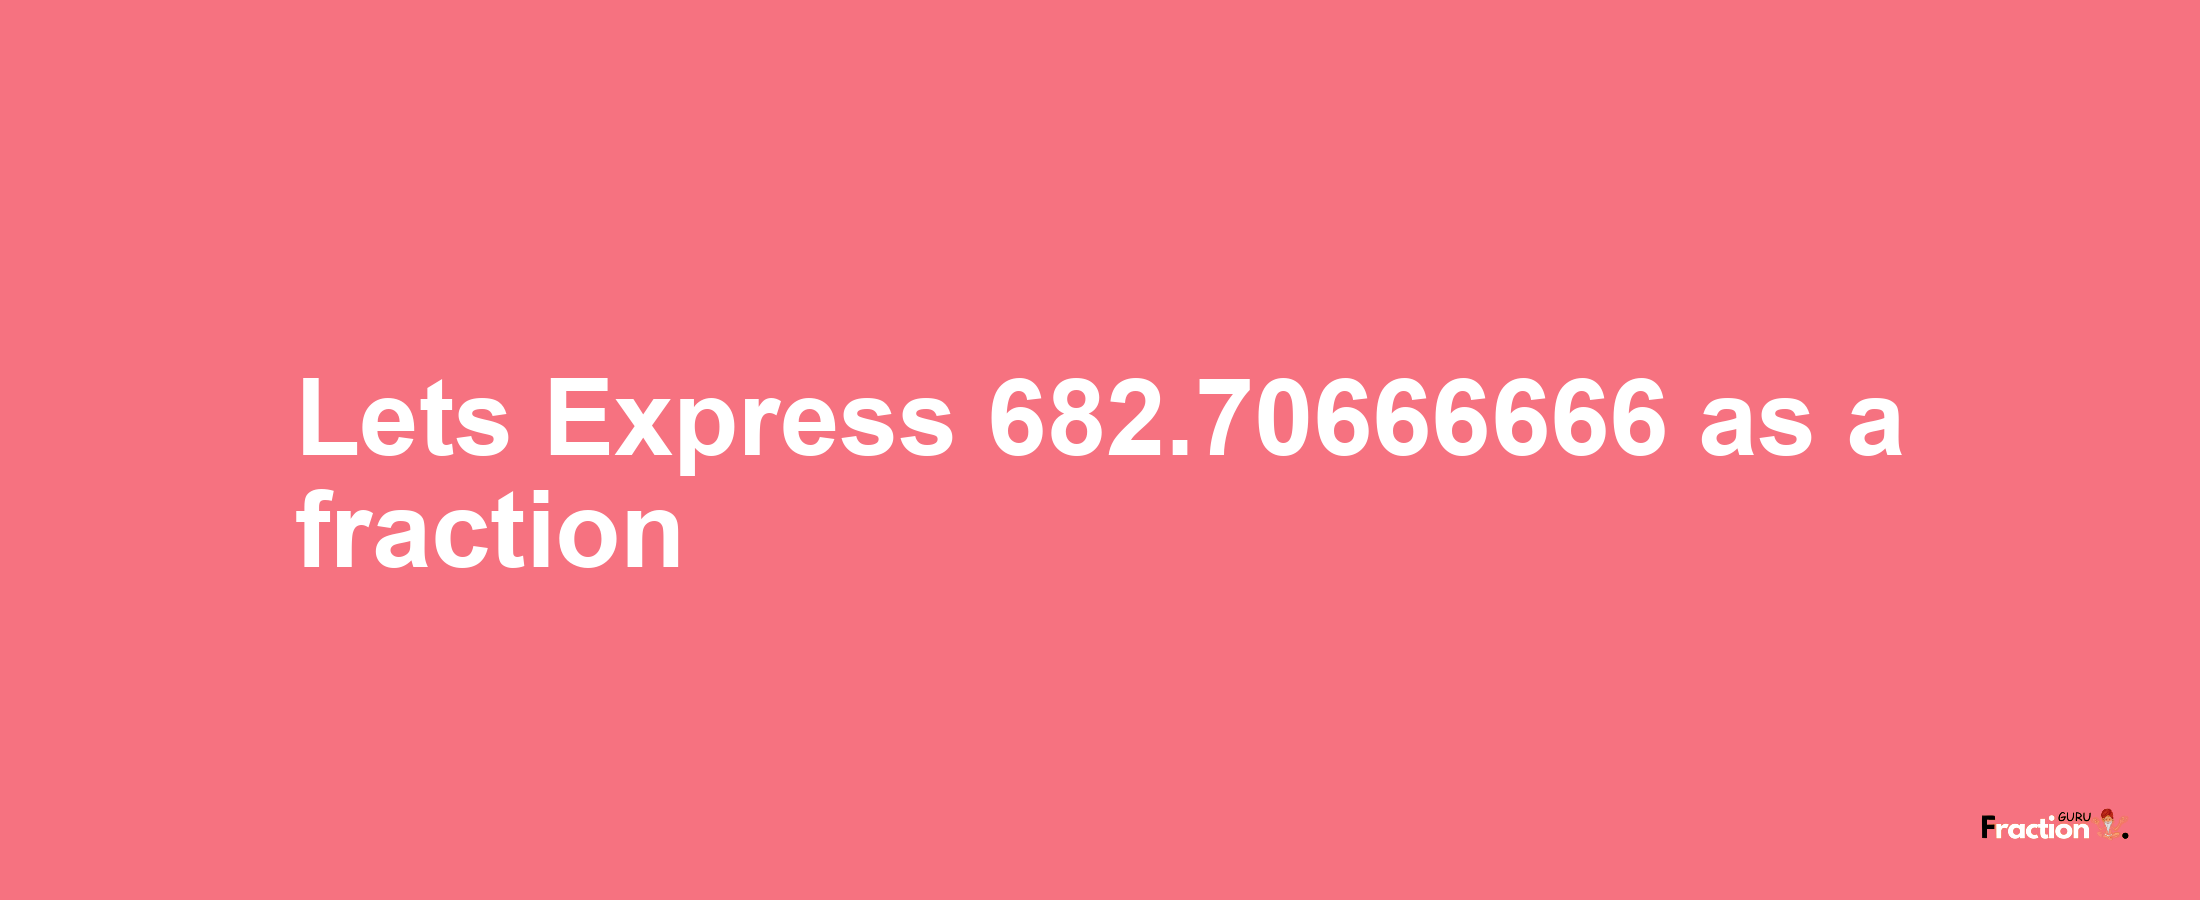 Lets Express 682.70666666 as afraction